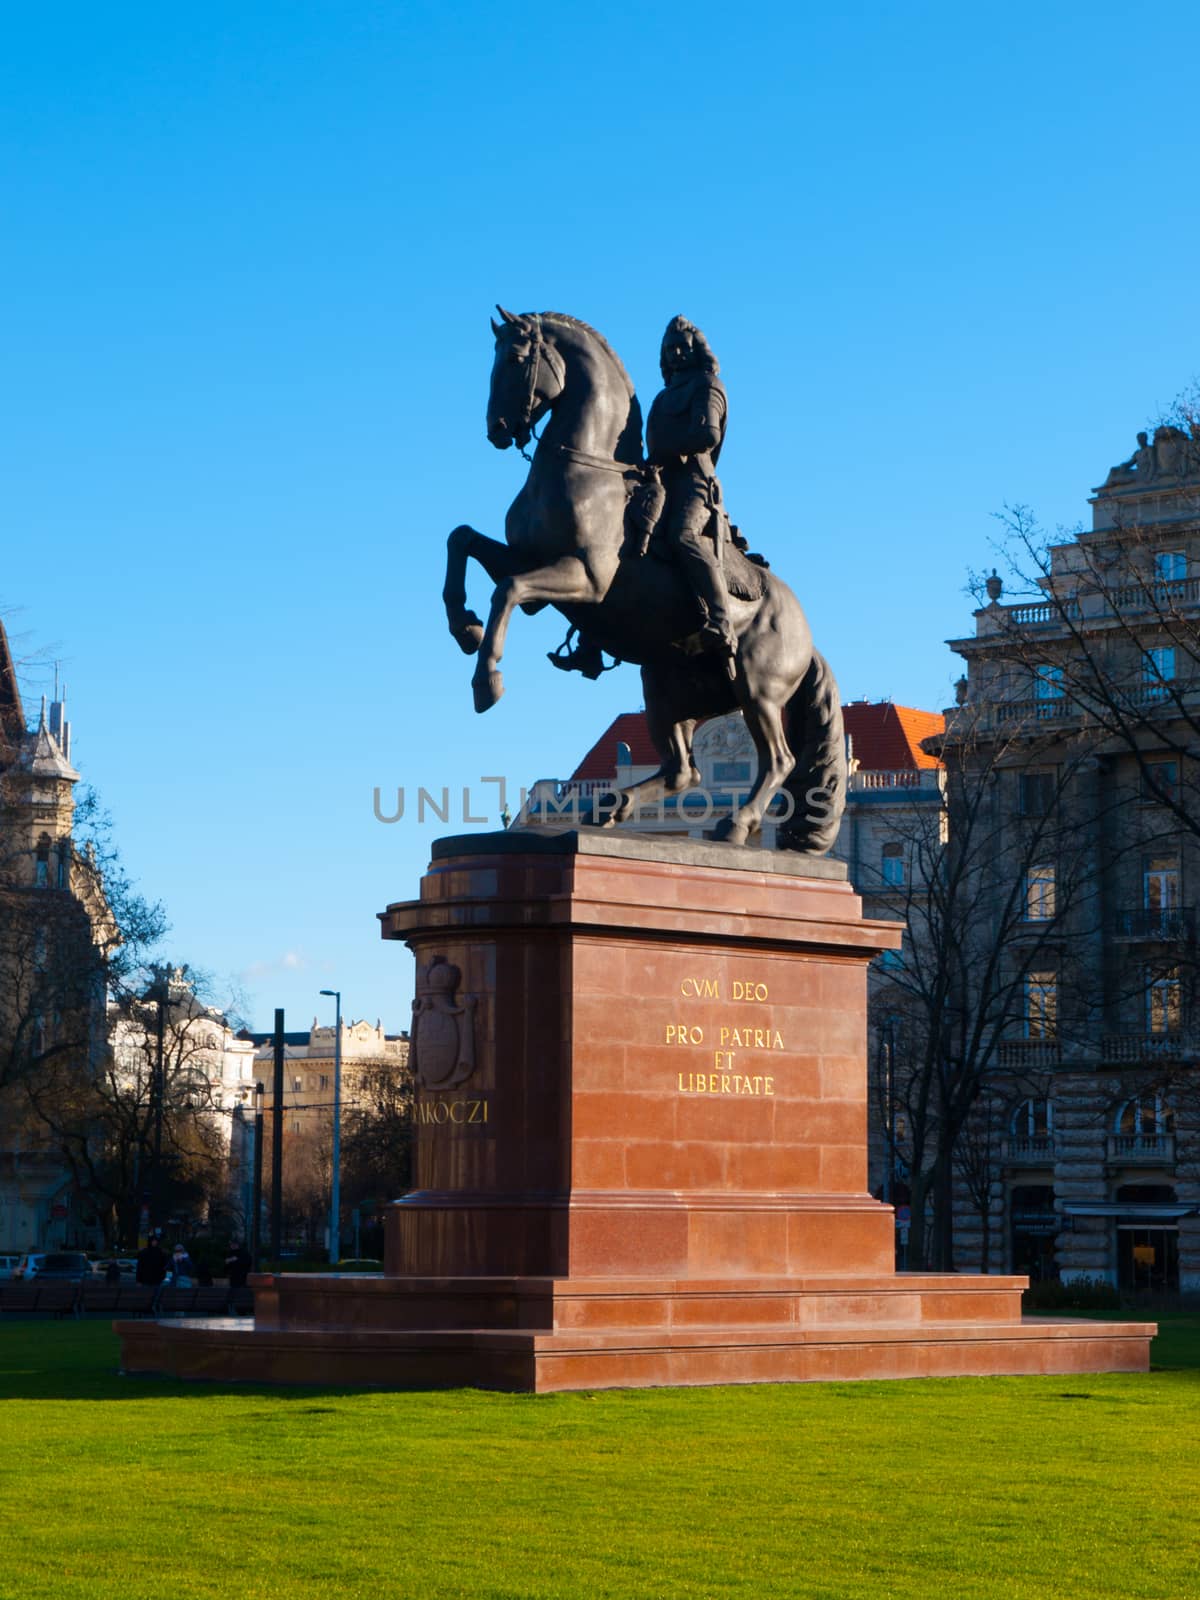 Equestrian statue of Ferenc Rakoczi mounted on a horse, Kossuth Lajos Square, Budapest, Hungary, Europe by pyty